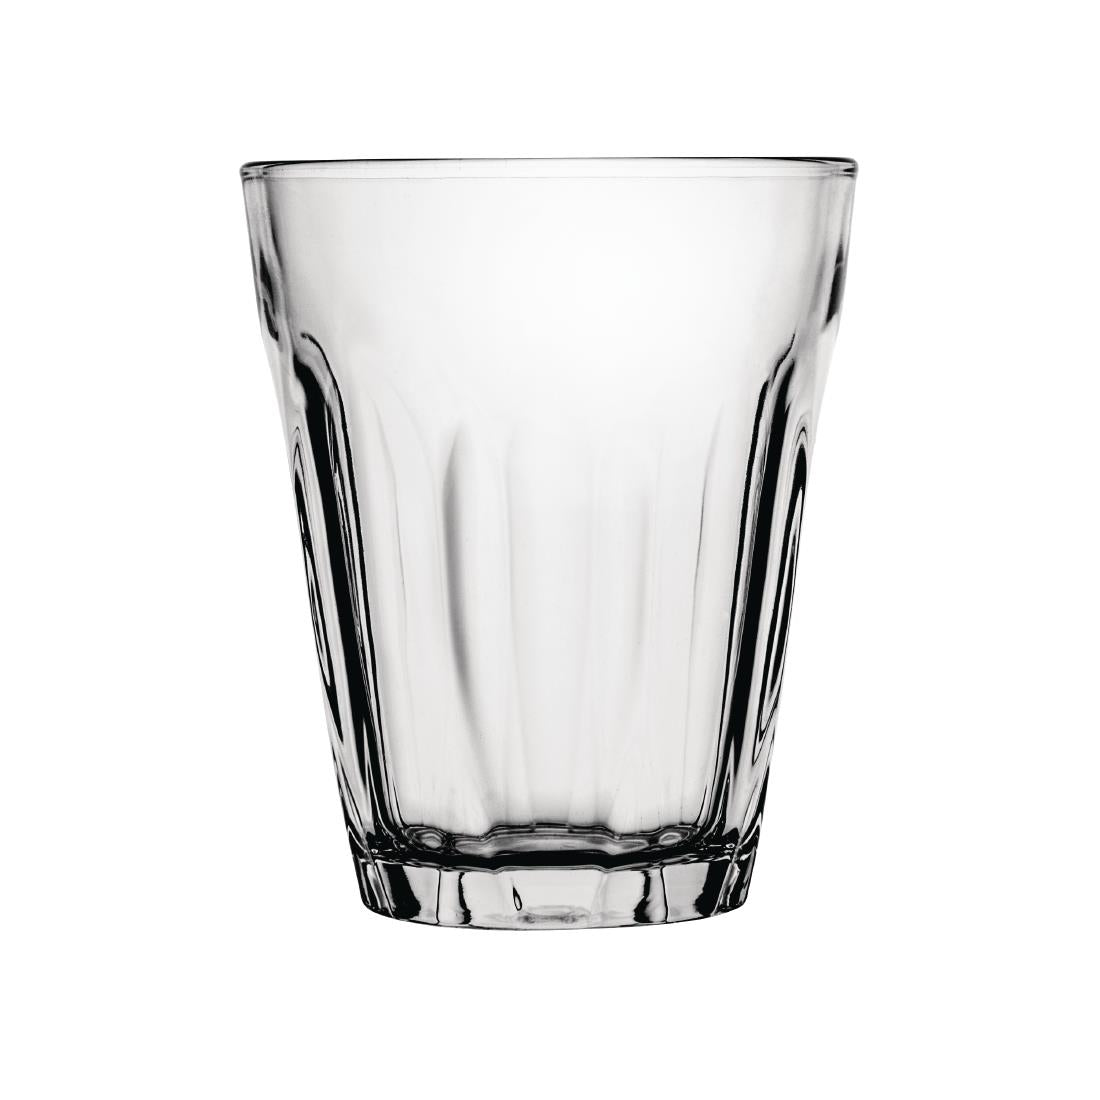 DB947 Olympia Toughened Tumbler Glasses 230ml 8oz (Pack of 12) JD Catering Equipment Solutions Ltd